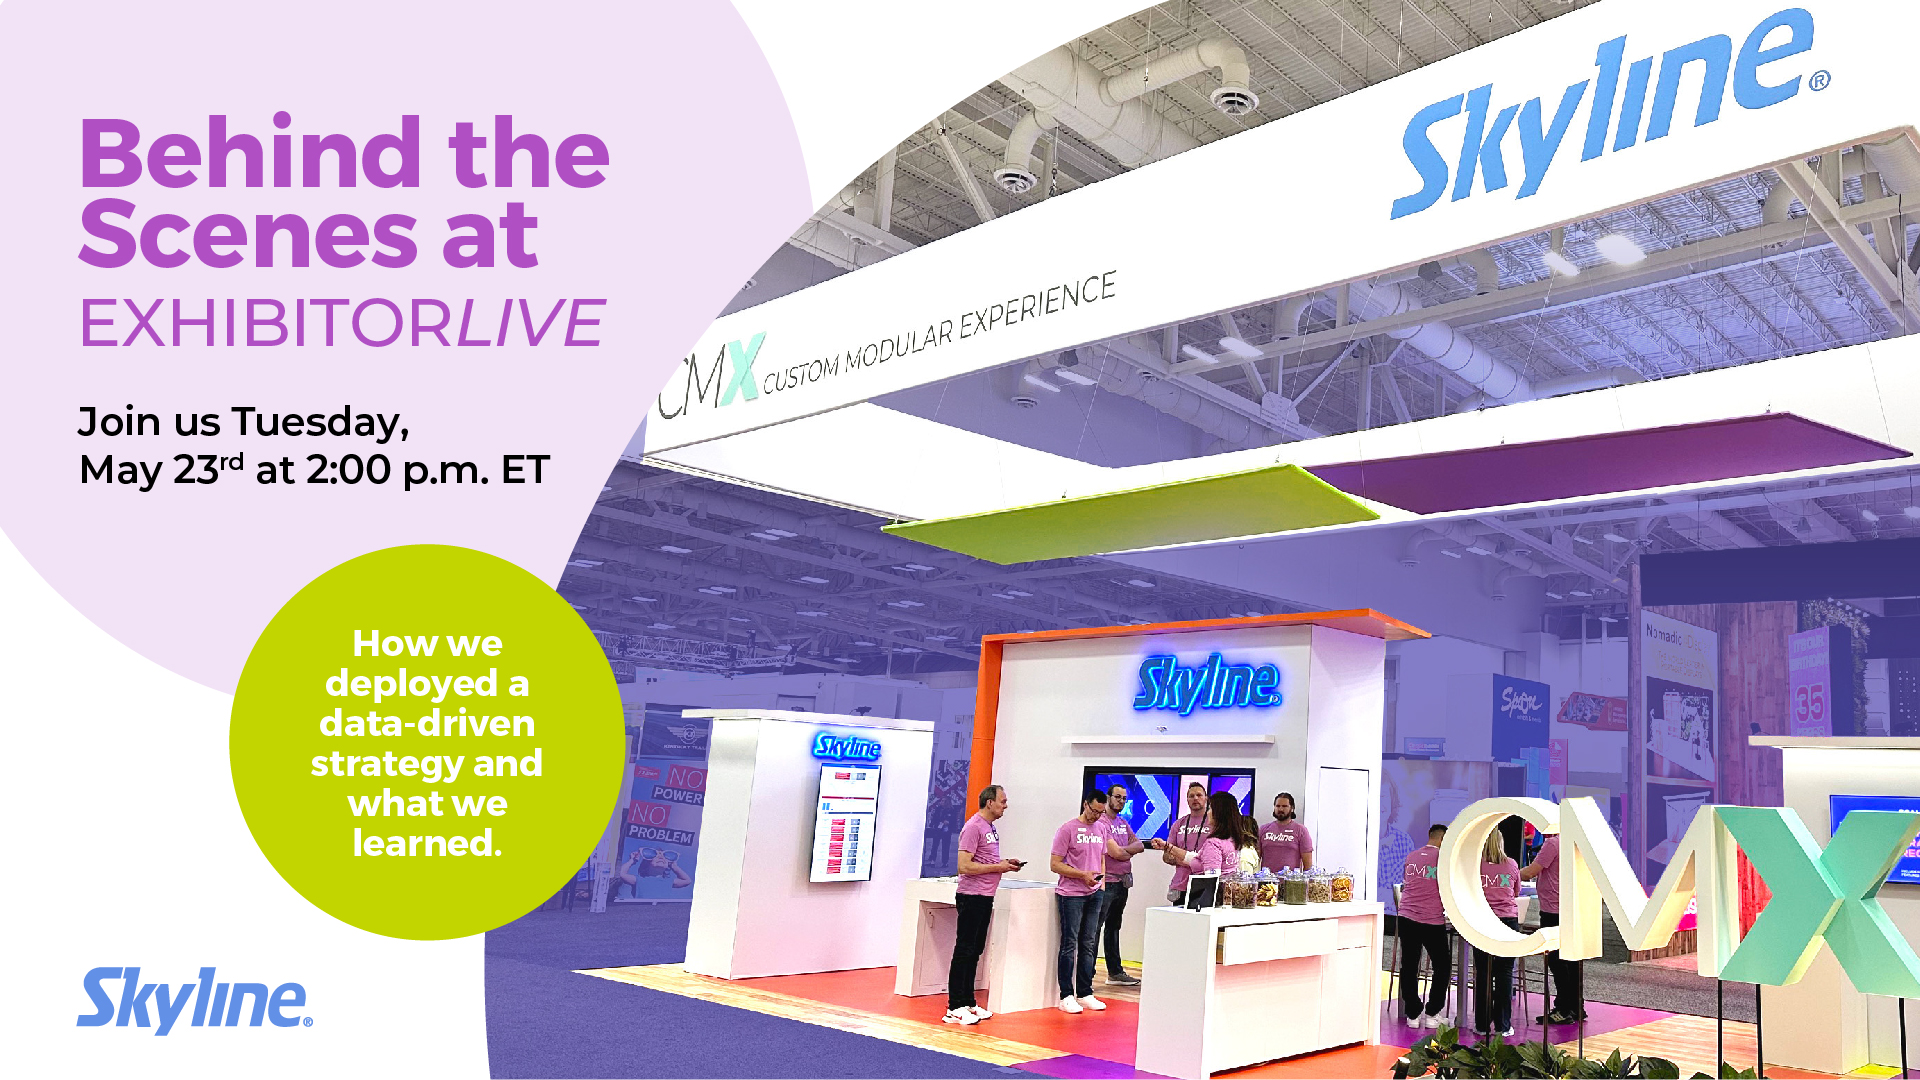  Behind the Scenes at EXHIBITORLIVE: How we deployed a data-driven strategy and what we learned 